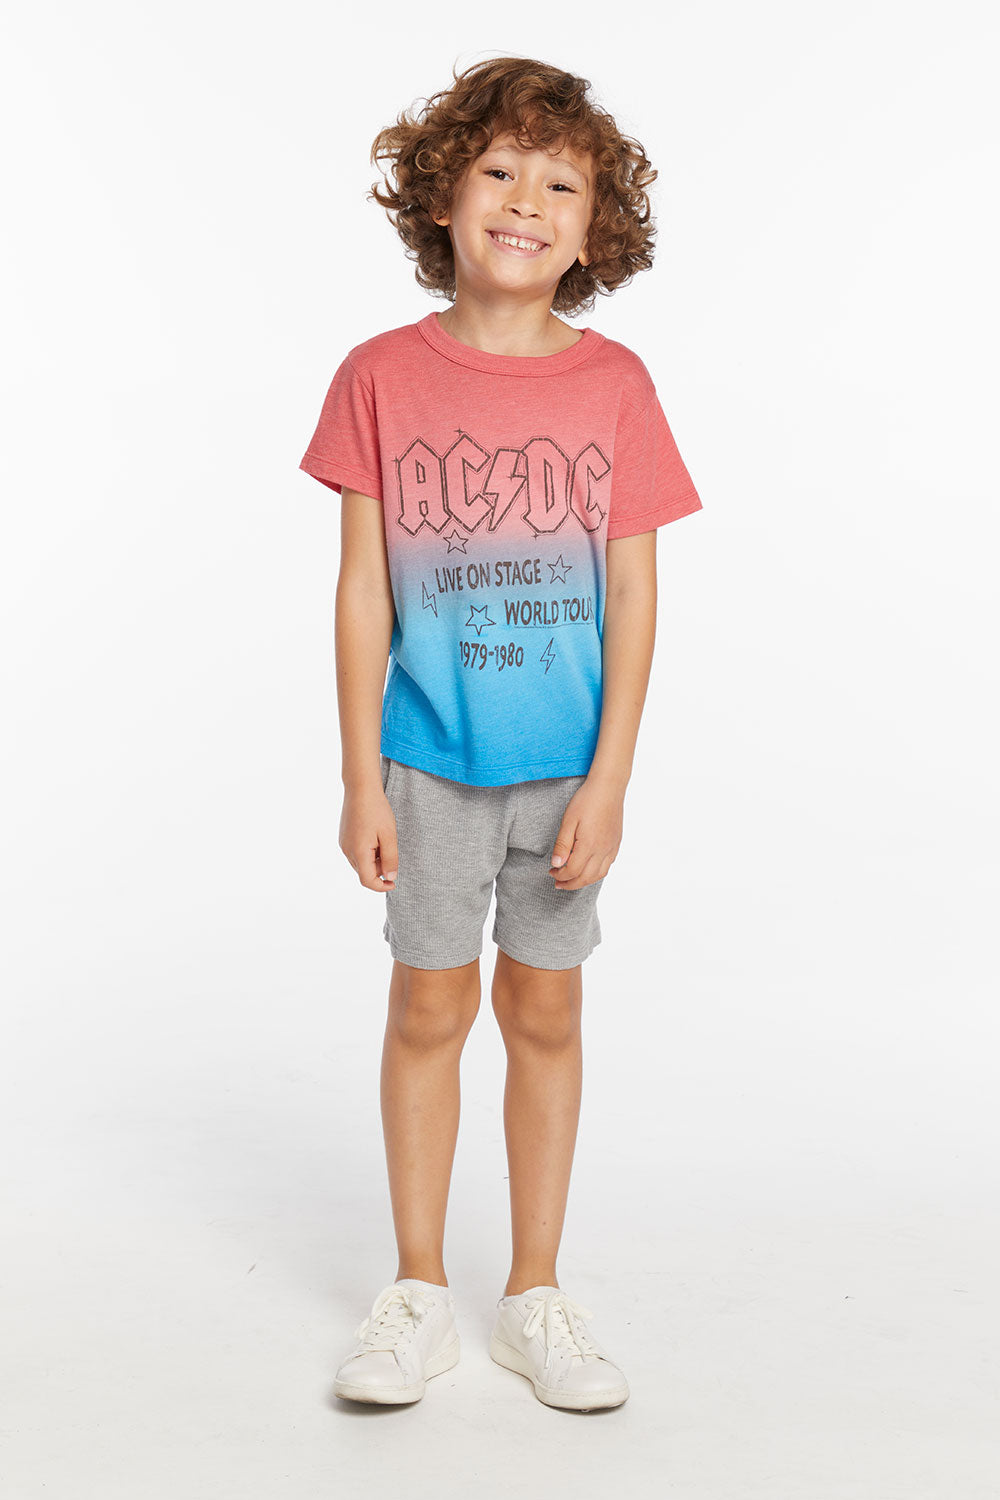 AC/DC Live On Stage Boys Tee BOYS chaserbrand